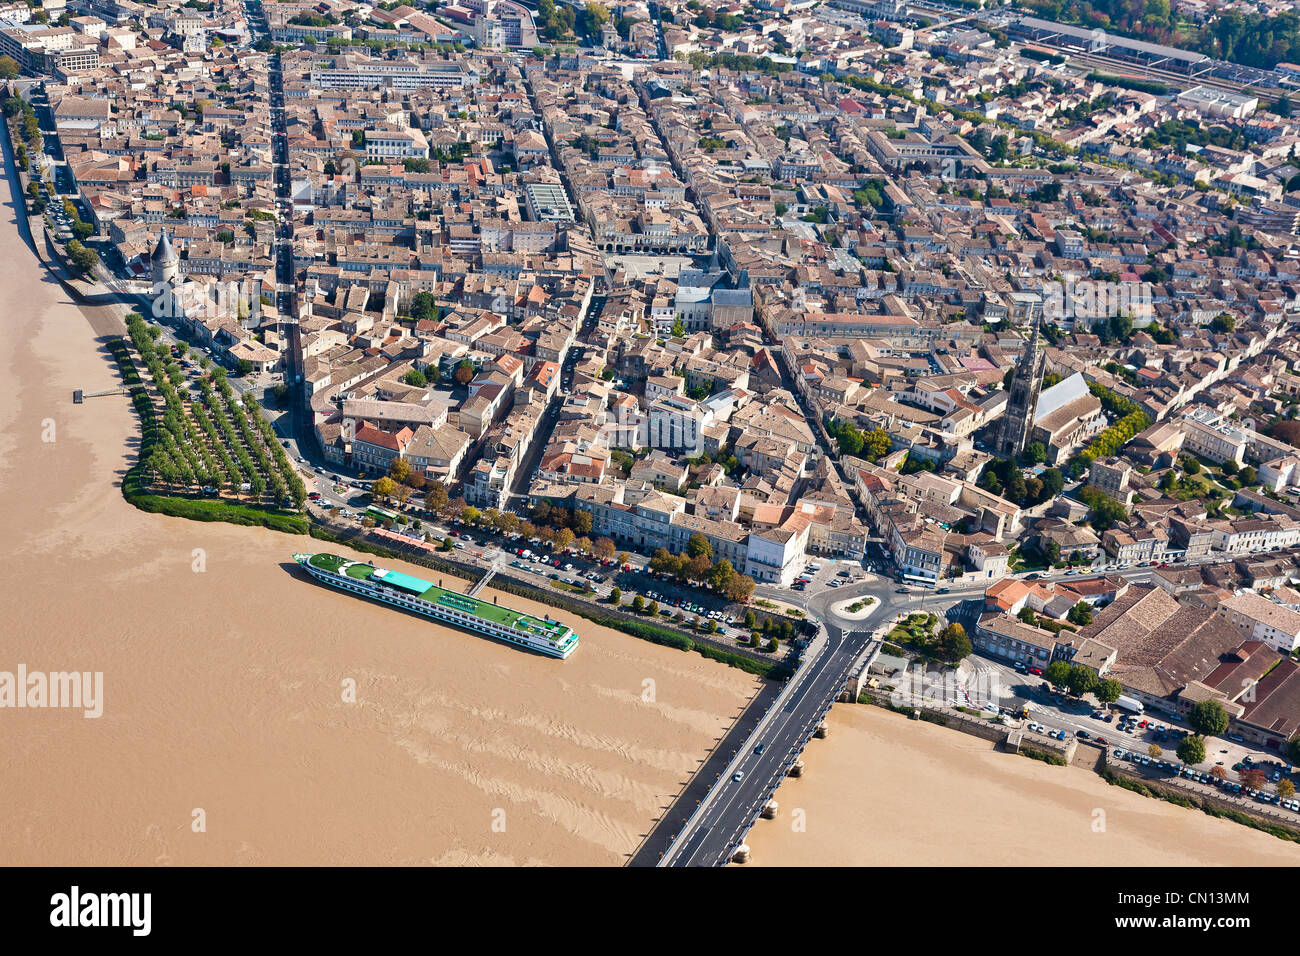 France, Gironde, Libourne (aerial view) Stock Photo